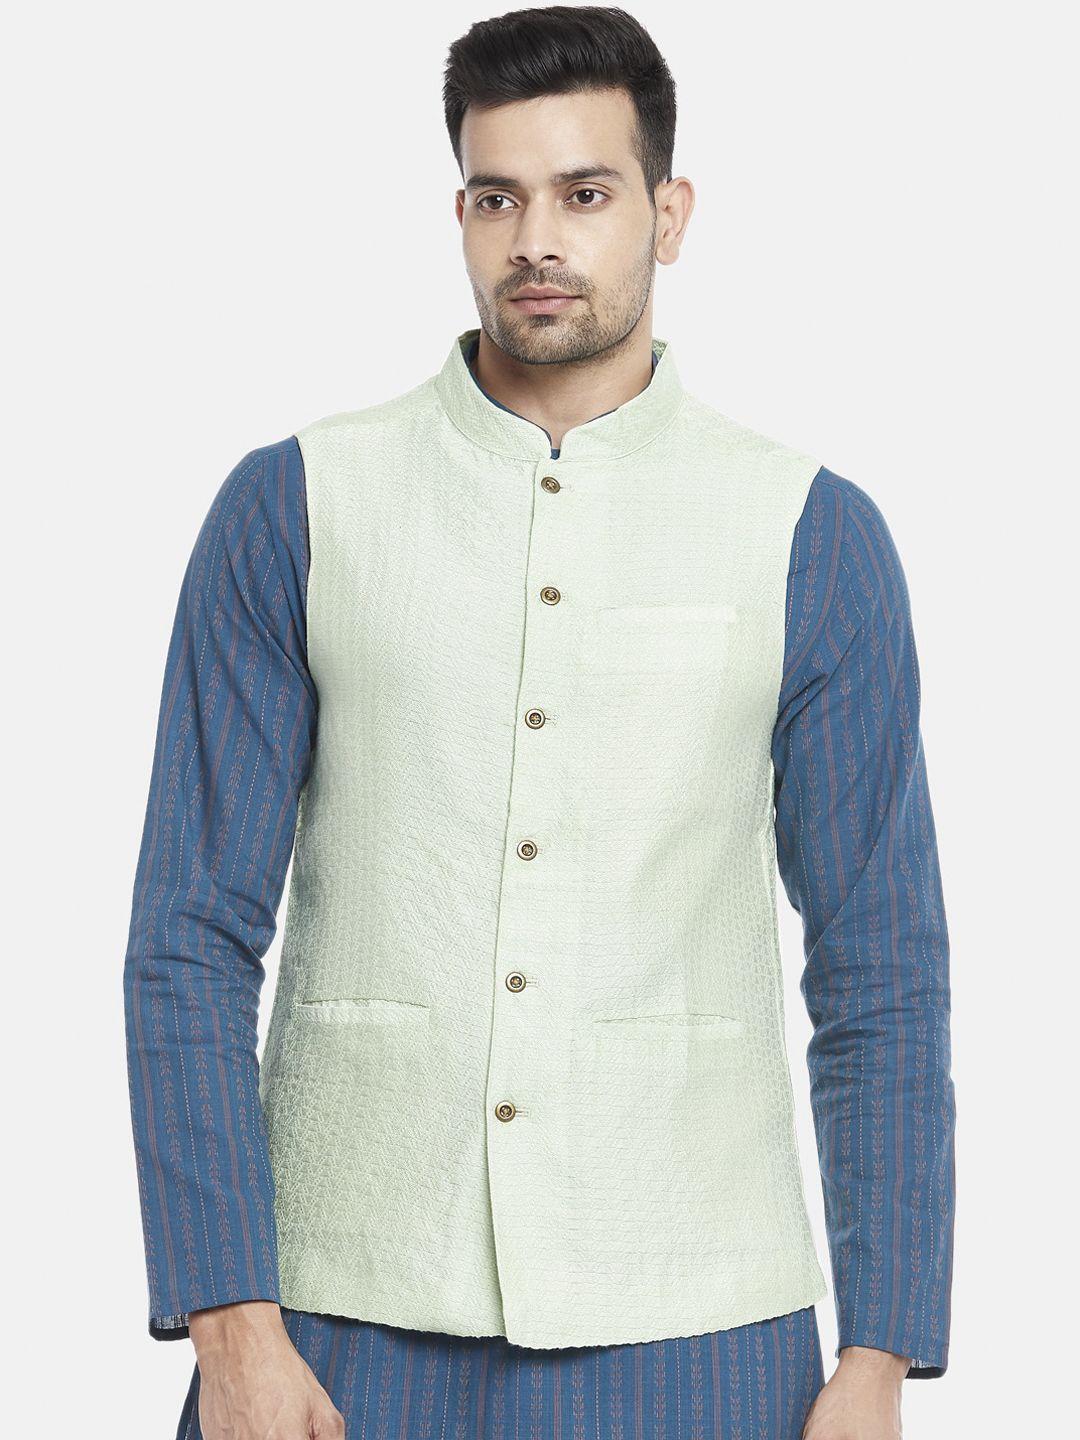 indus route by pantaloons men green woven design nehru jacket